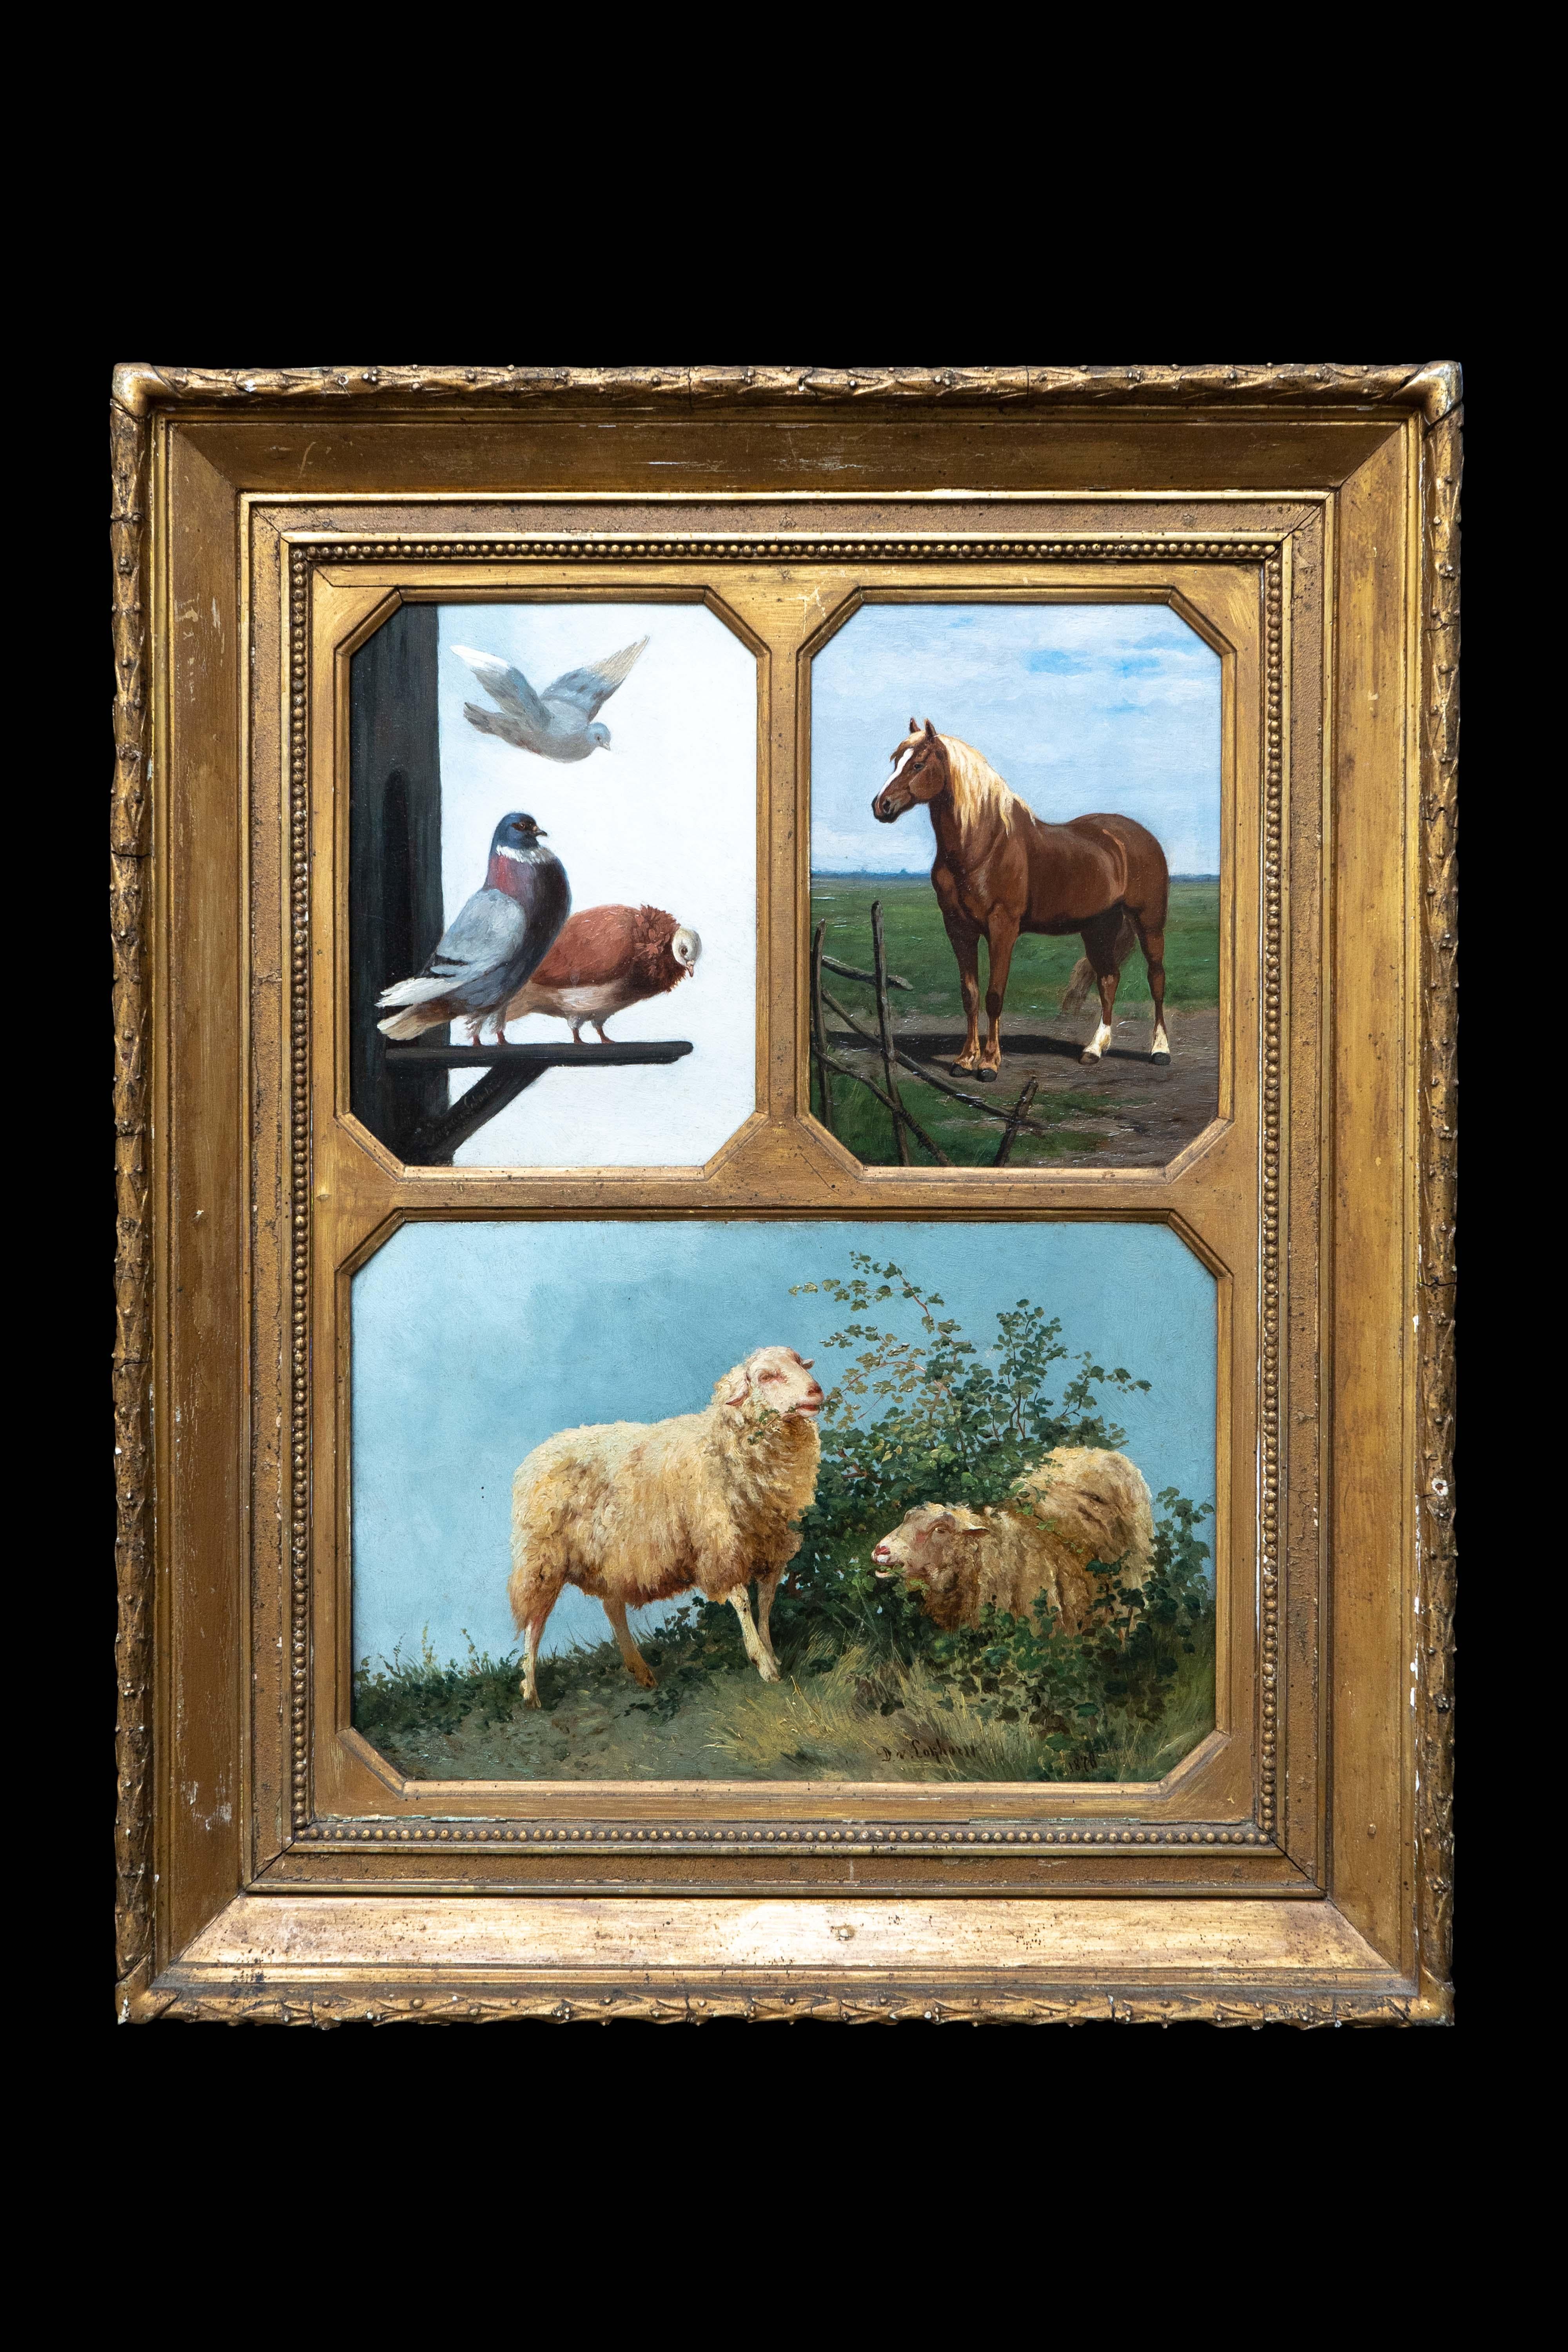 Dirk van Lokhorst (Dutch, 1818–1893) 
Two Sheep Grazing Free together with their Two Companions 
Signed and dated 'D.v. Lokhorst 1878' bottom center and bottom right, oil on panel 

Dirk van Lokhorst was a Dutch painter. He was born, lived and